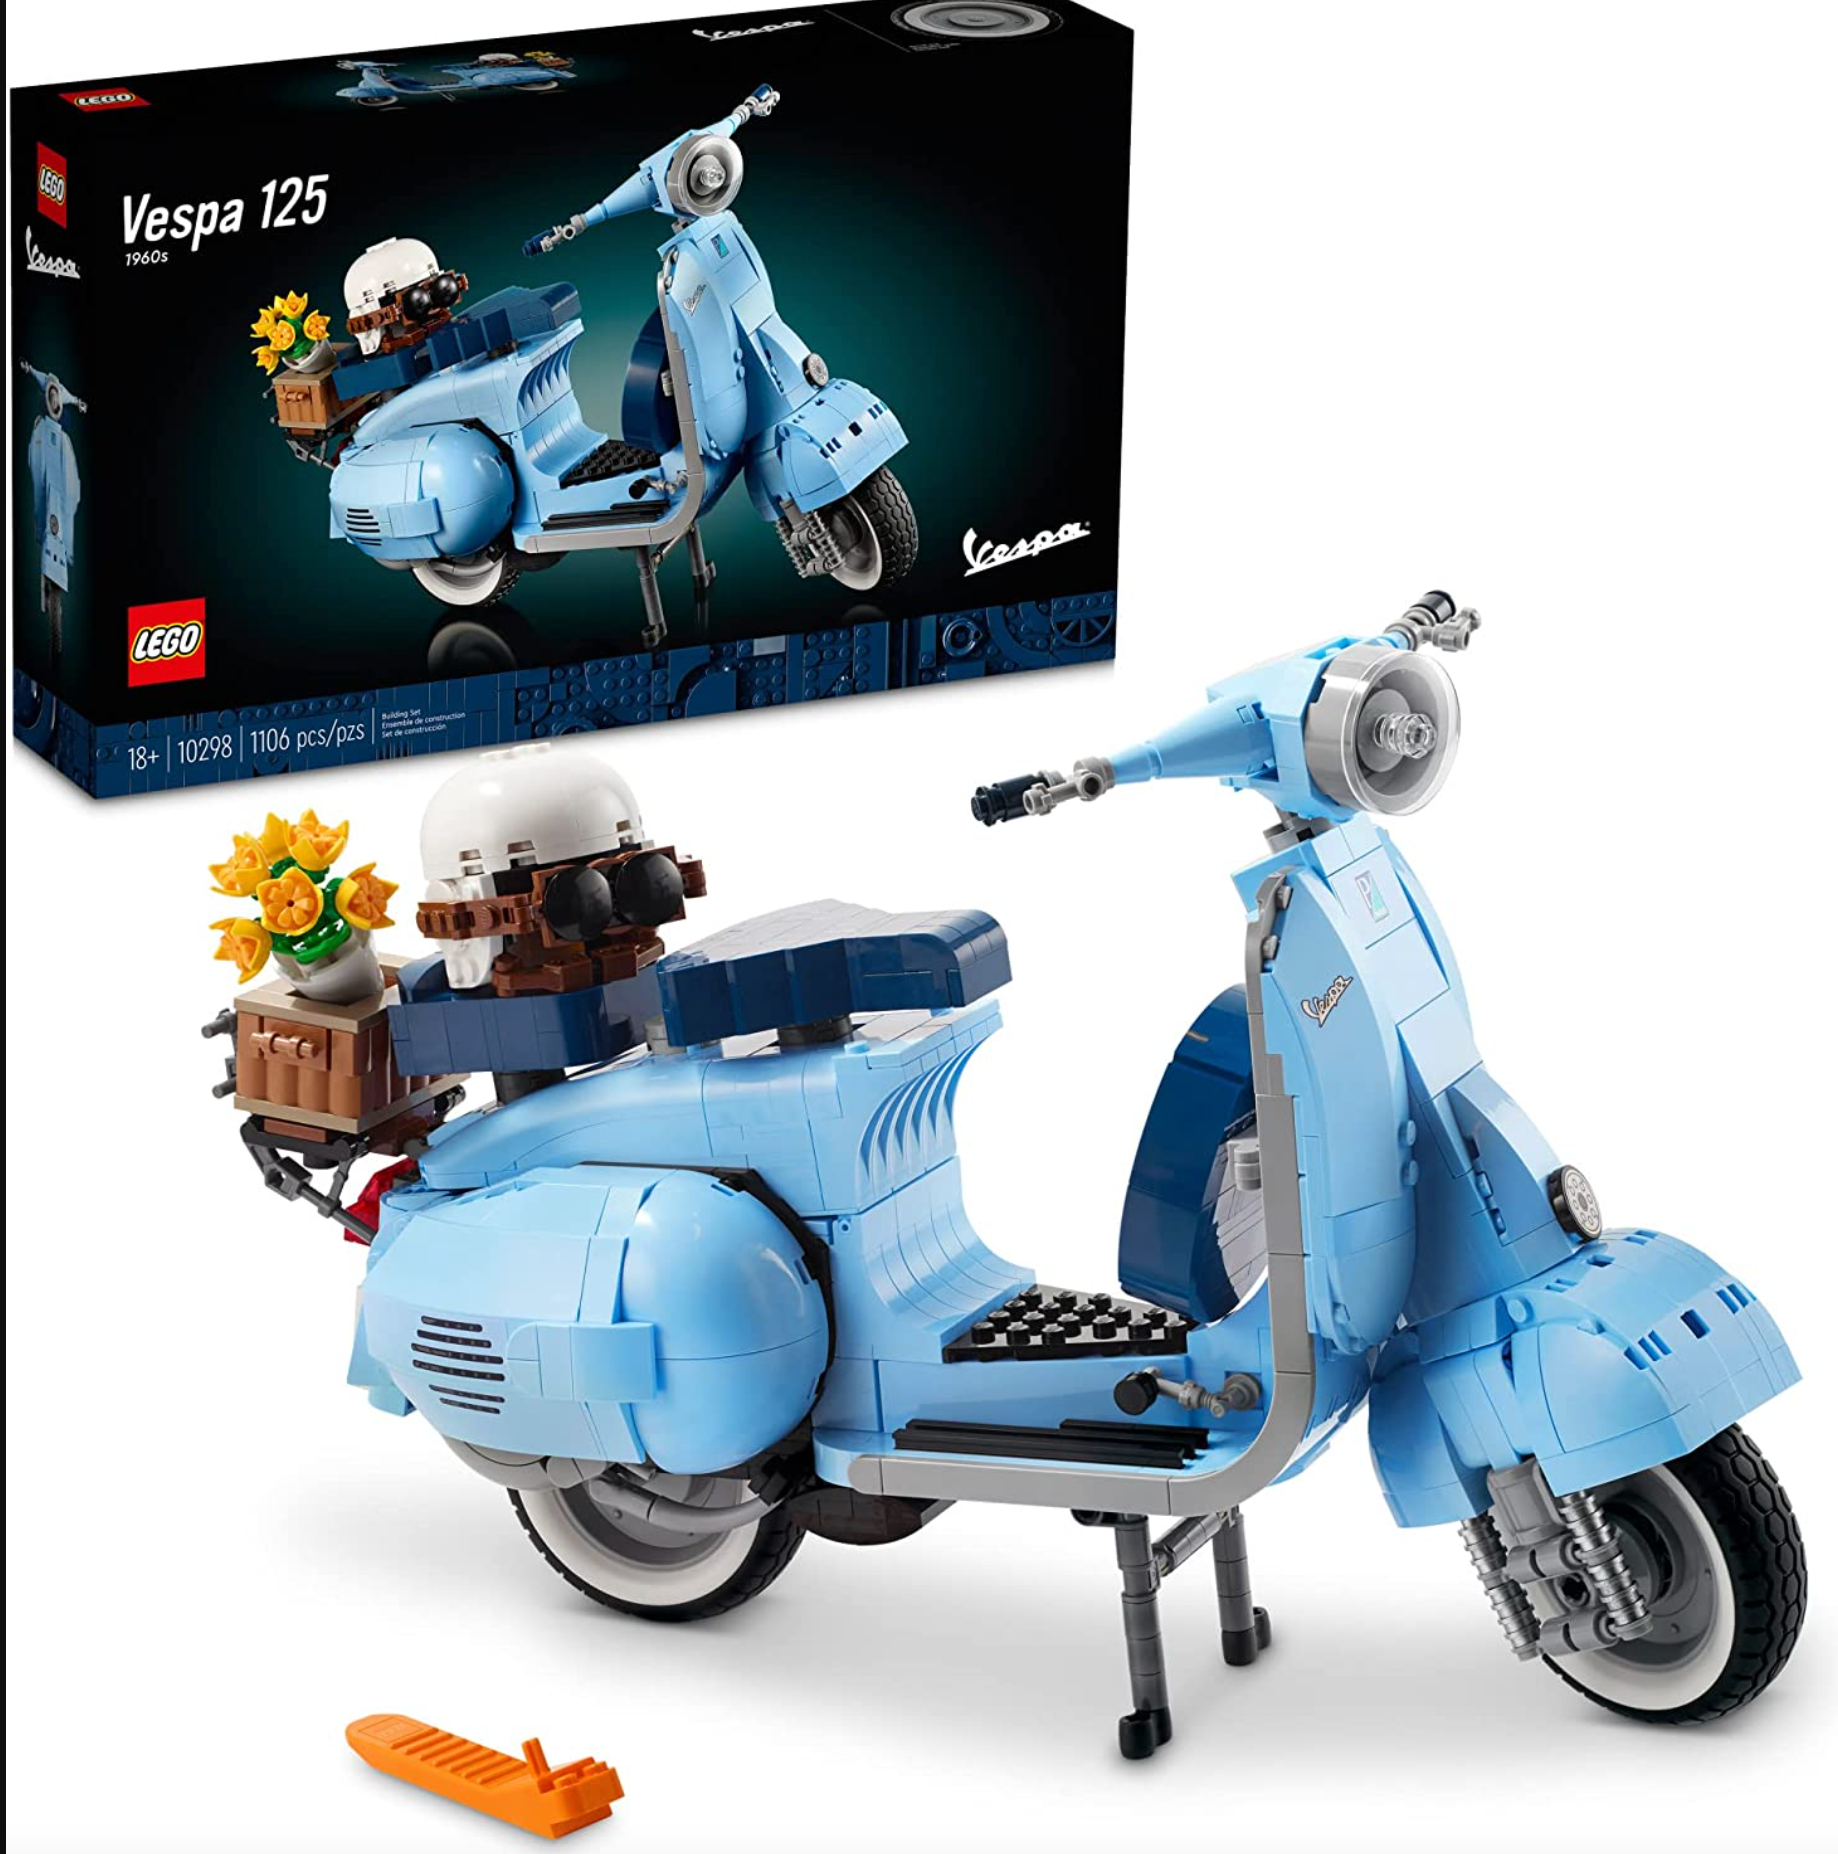 LEGO Vespa 125 10298 Model Building Kit; Build a Detailed Displayable Model of a Vintage Italian Icon